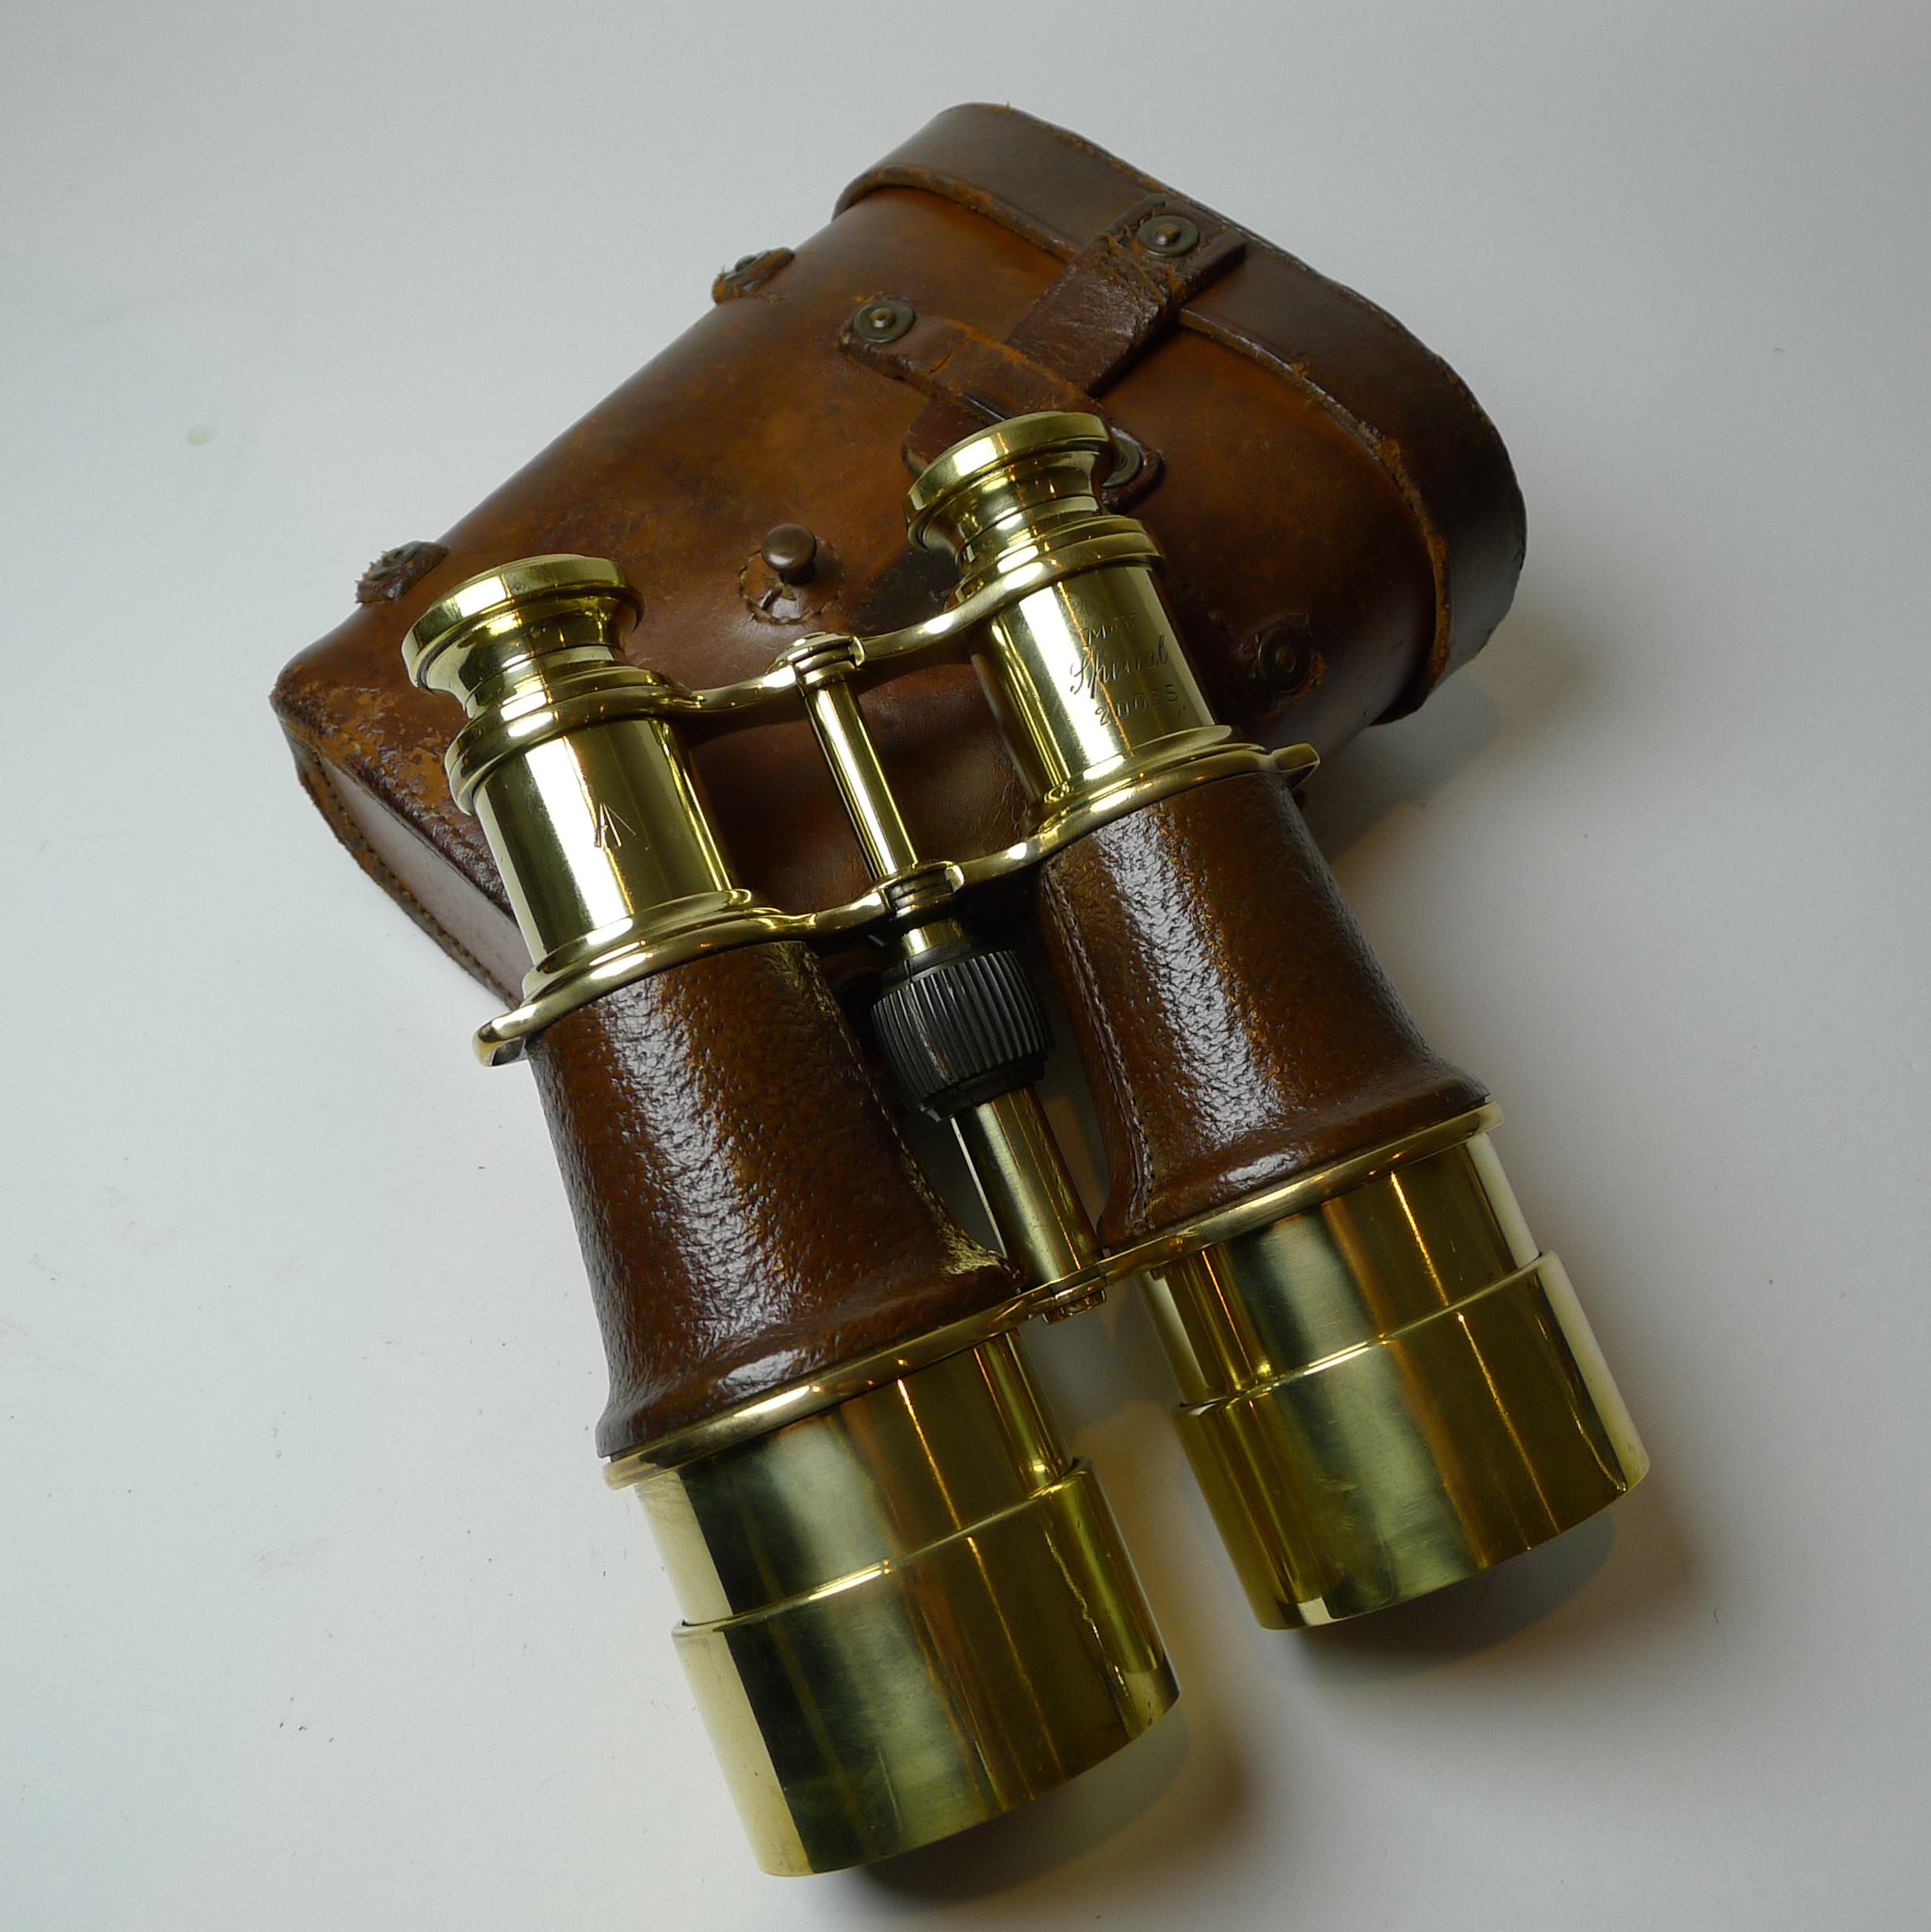 A wonderful pair of fully refurbished French made binoculars, stamped M G (Ministere de la Guerre) created for the British Military for use during World War 1 in 1917.

The brass has been meticulously professionally polished, a winning combination